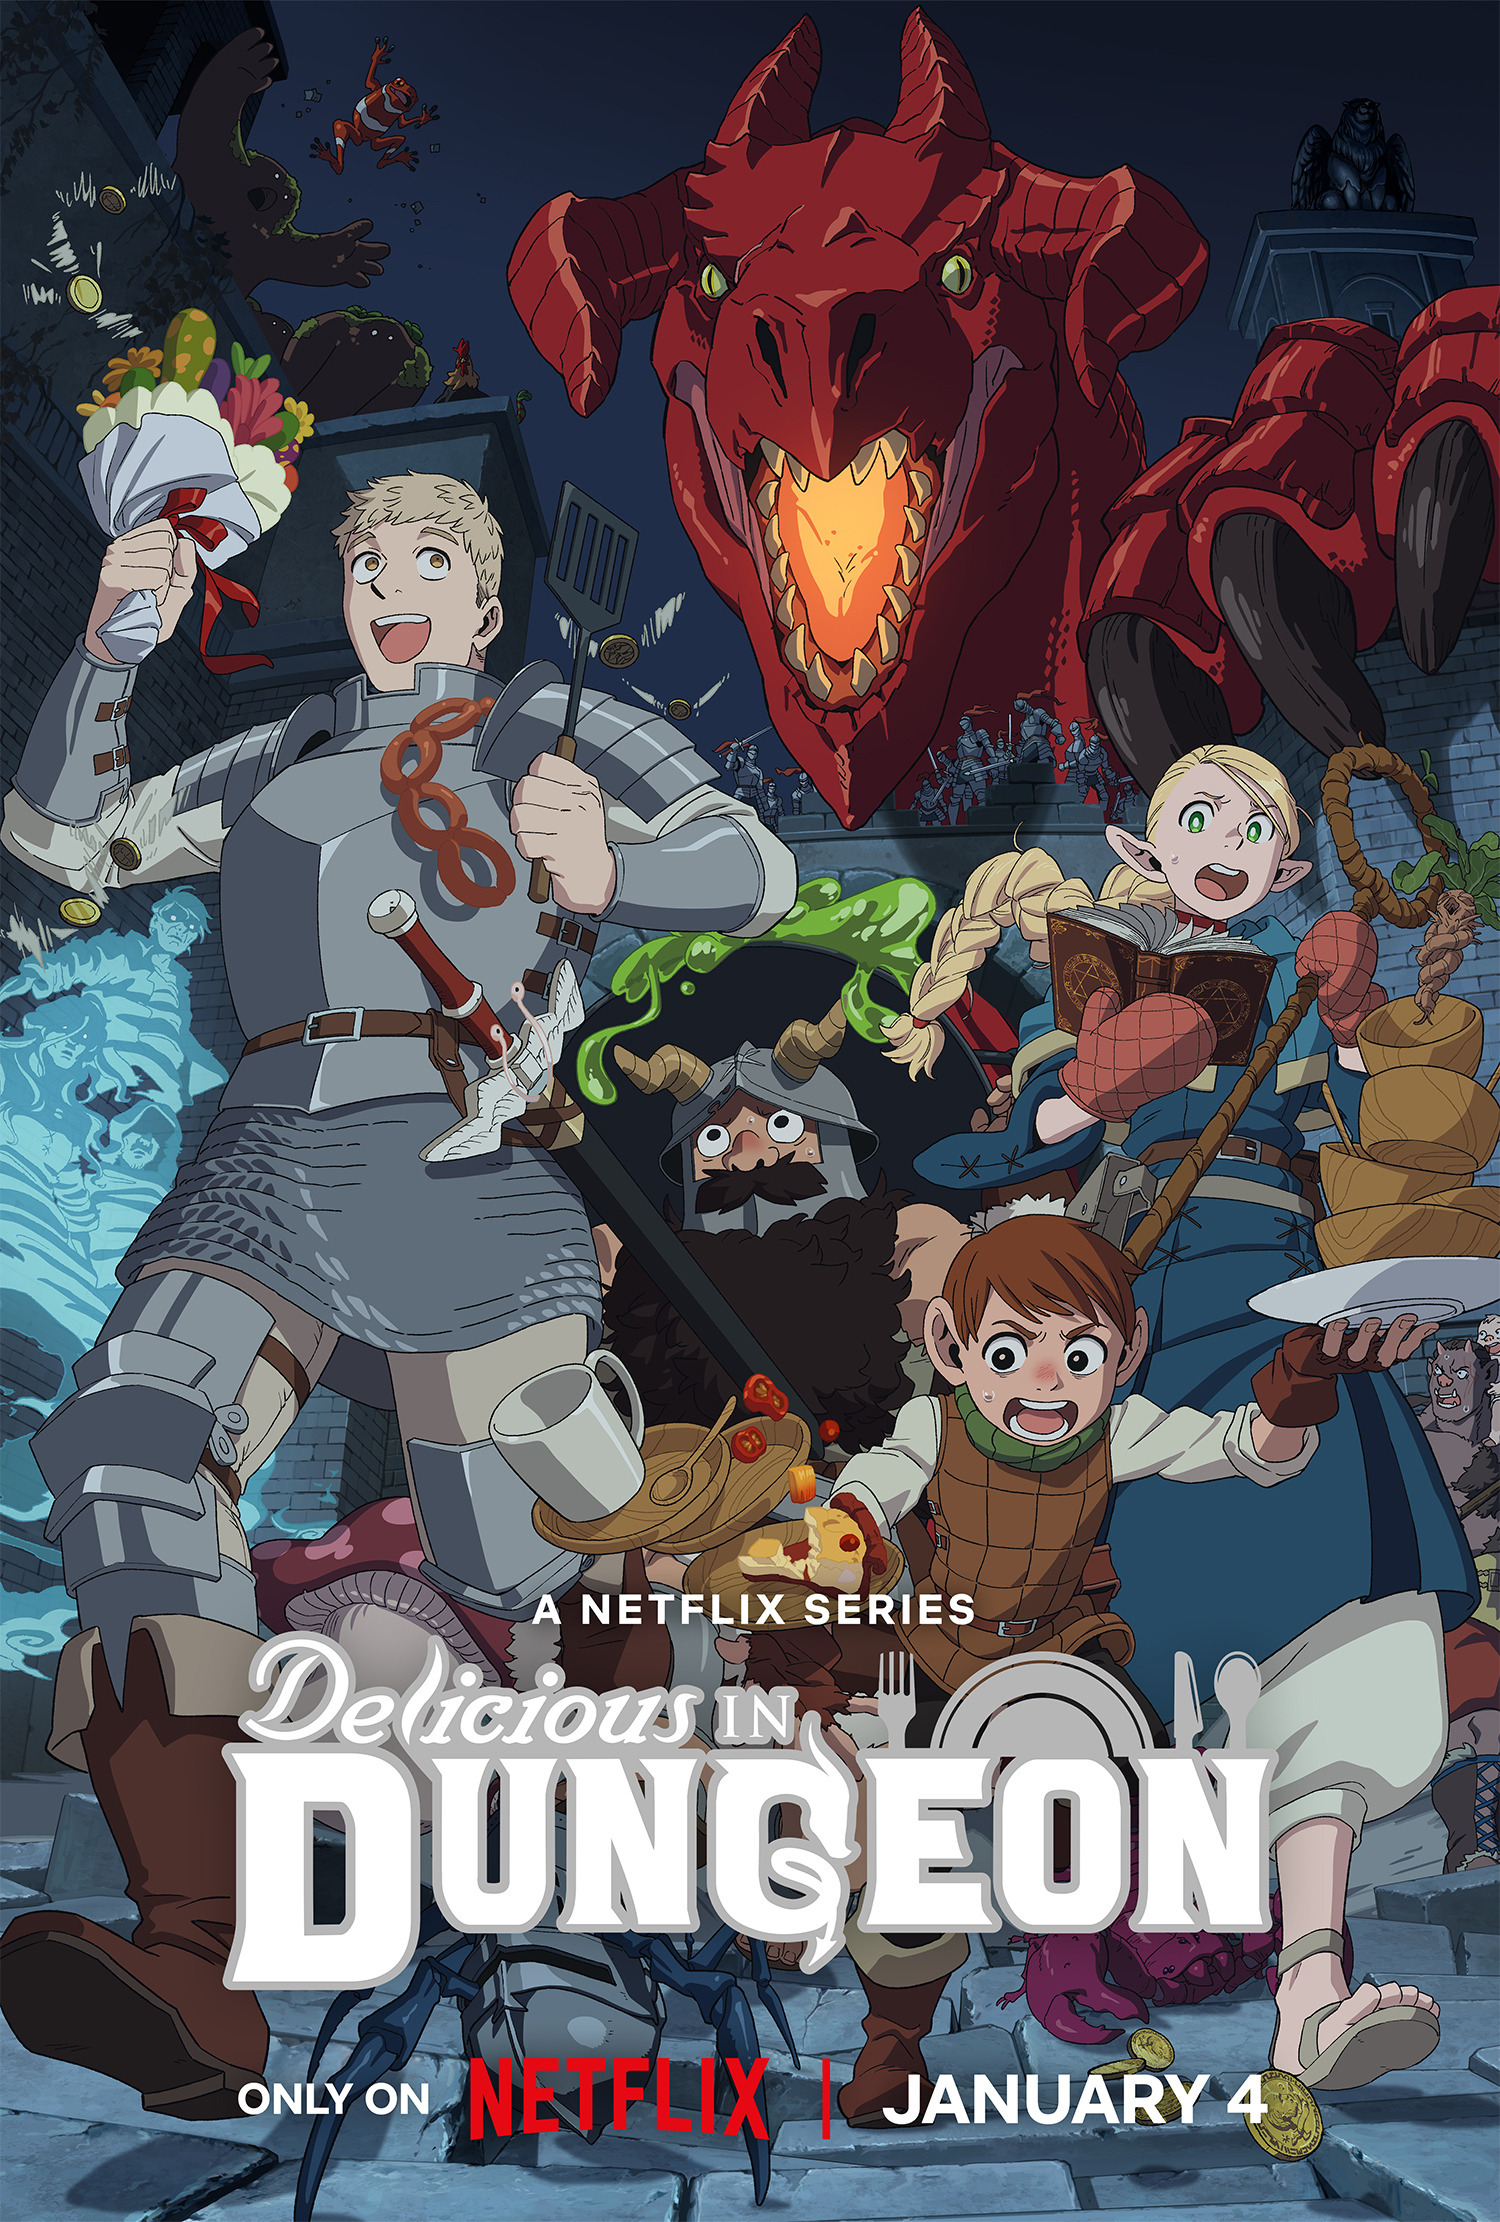 Mega Sized TV Poster Image for Dungeon Meshi (#2 of 2)